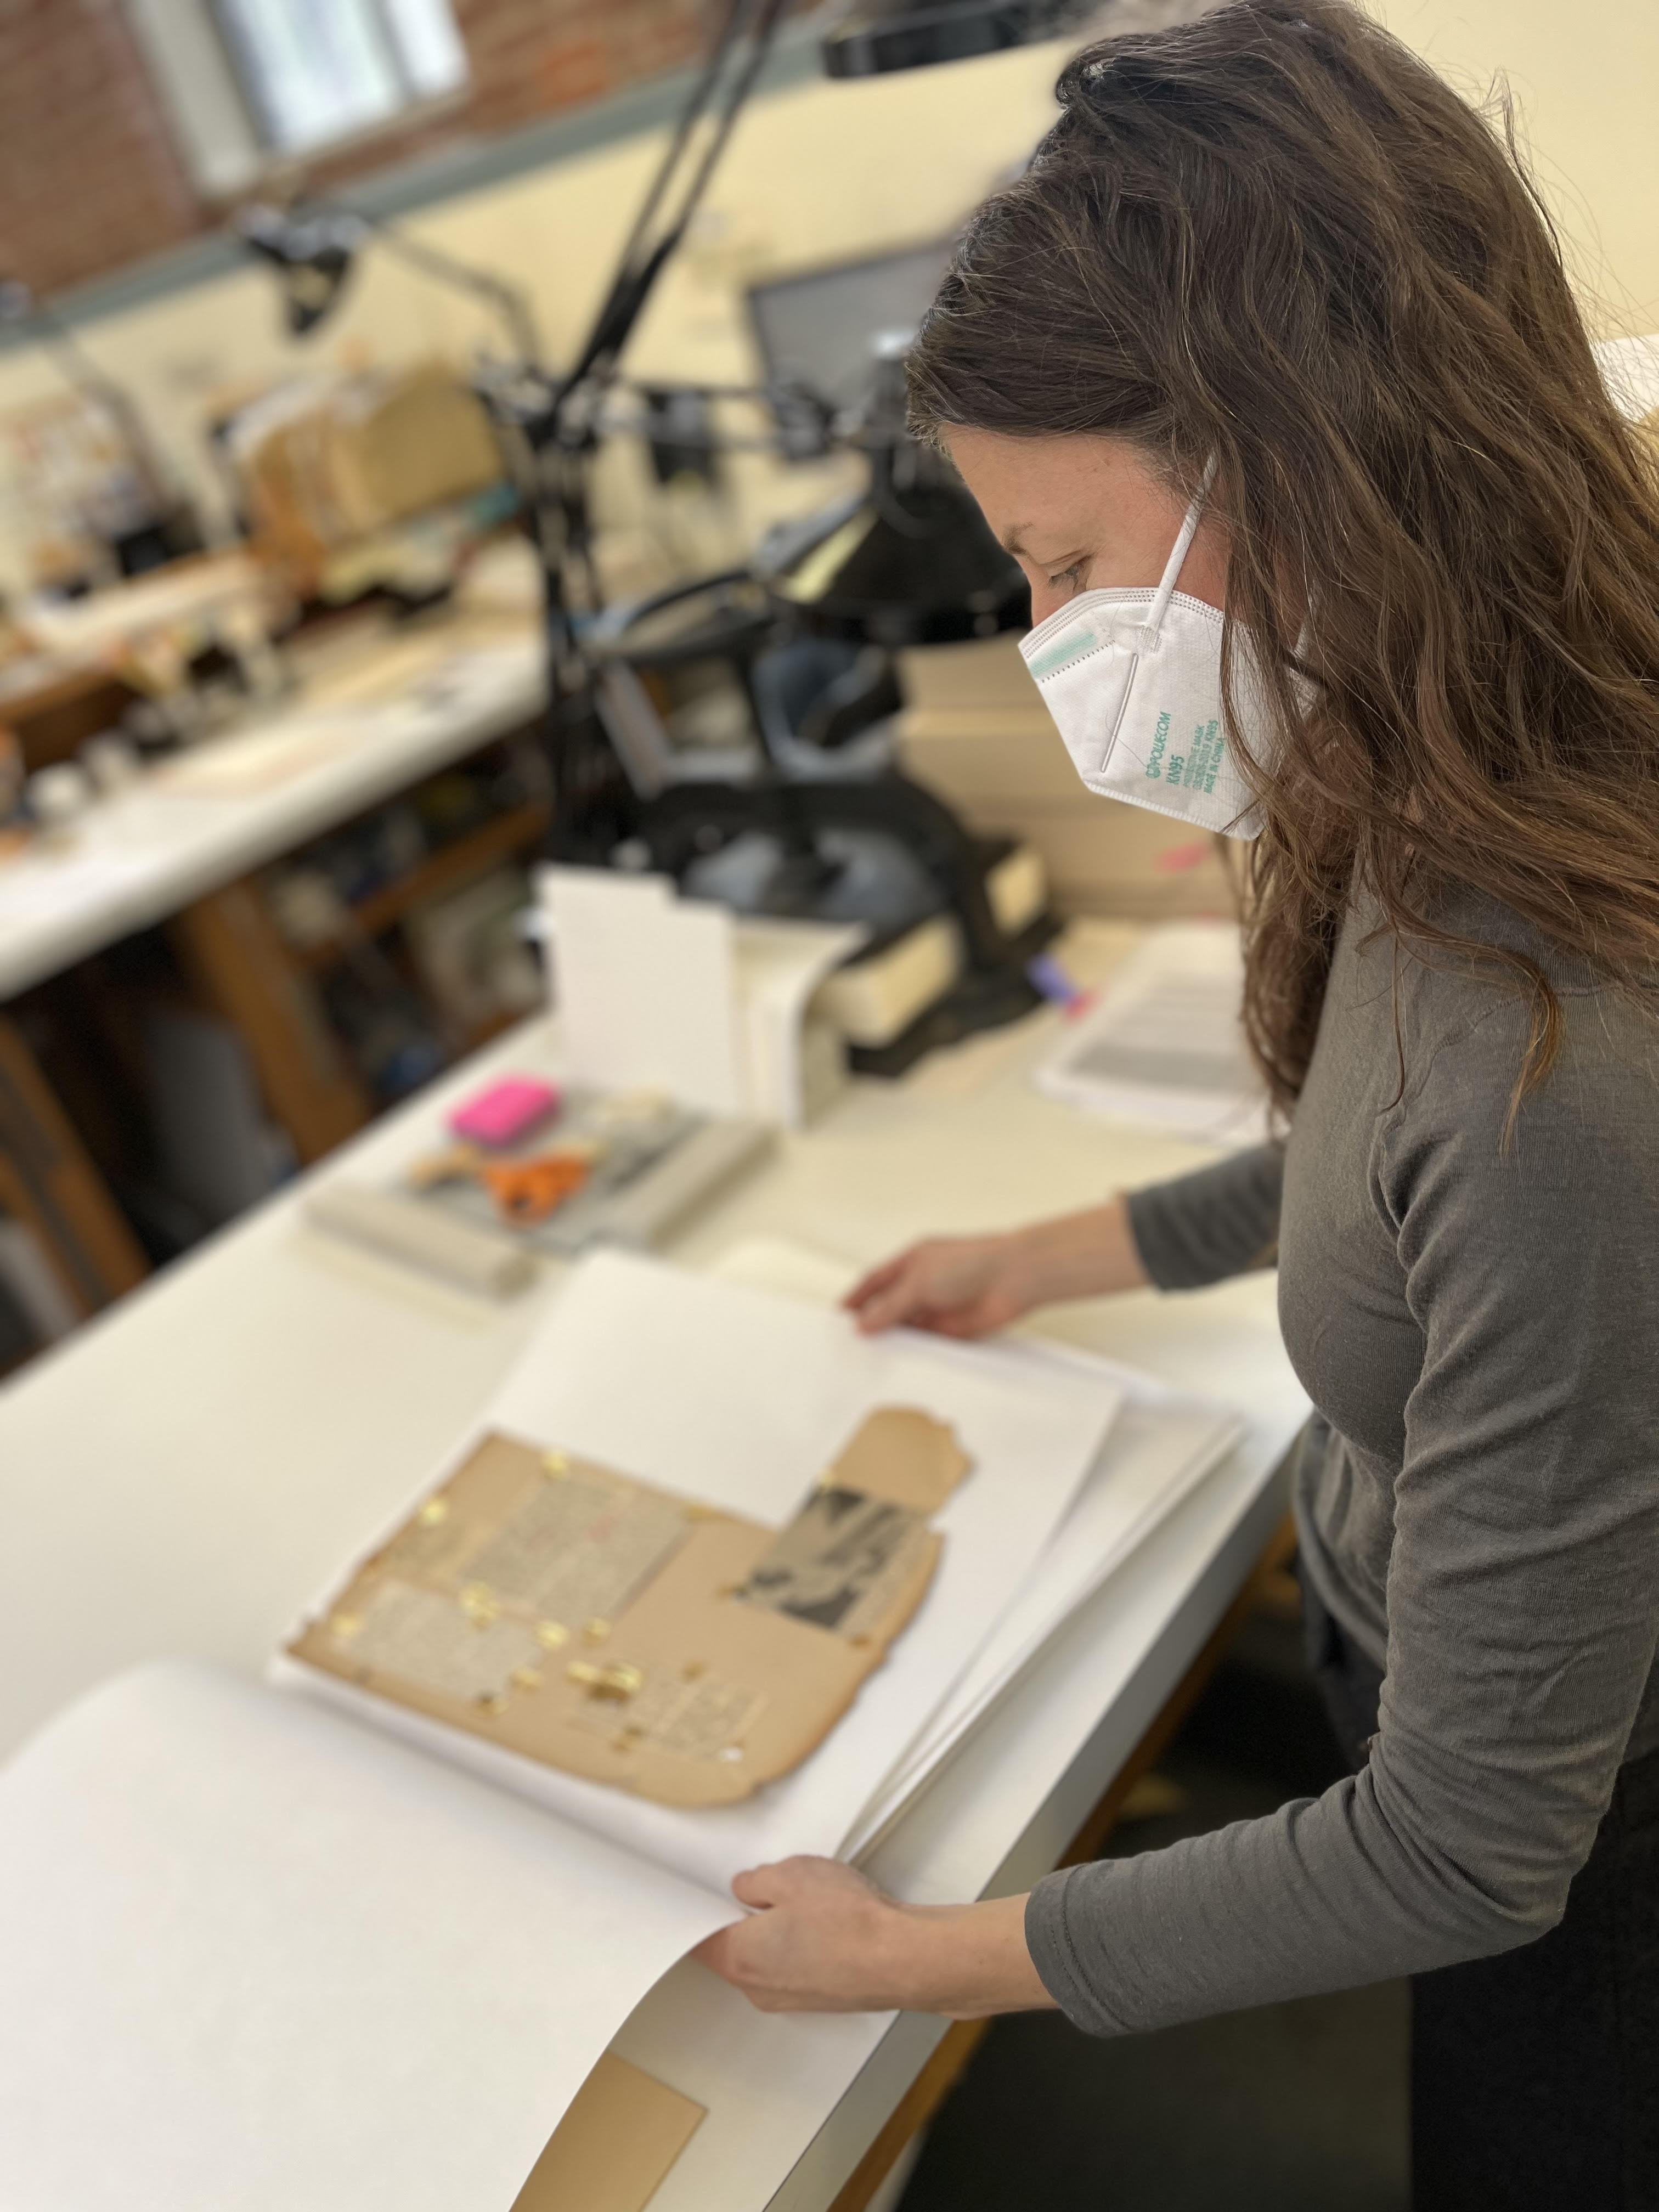 Amber Hares working on Count Basie scrapbook